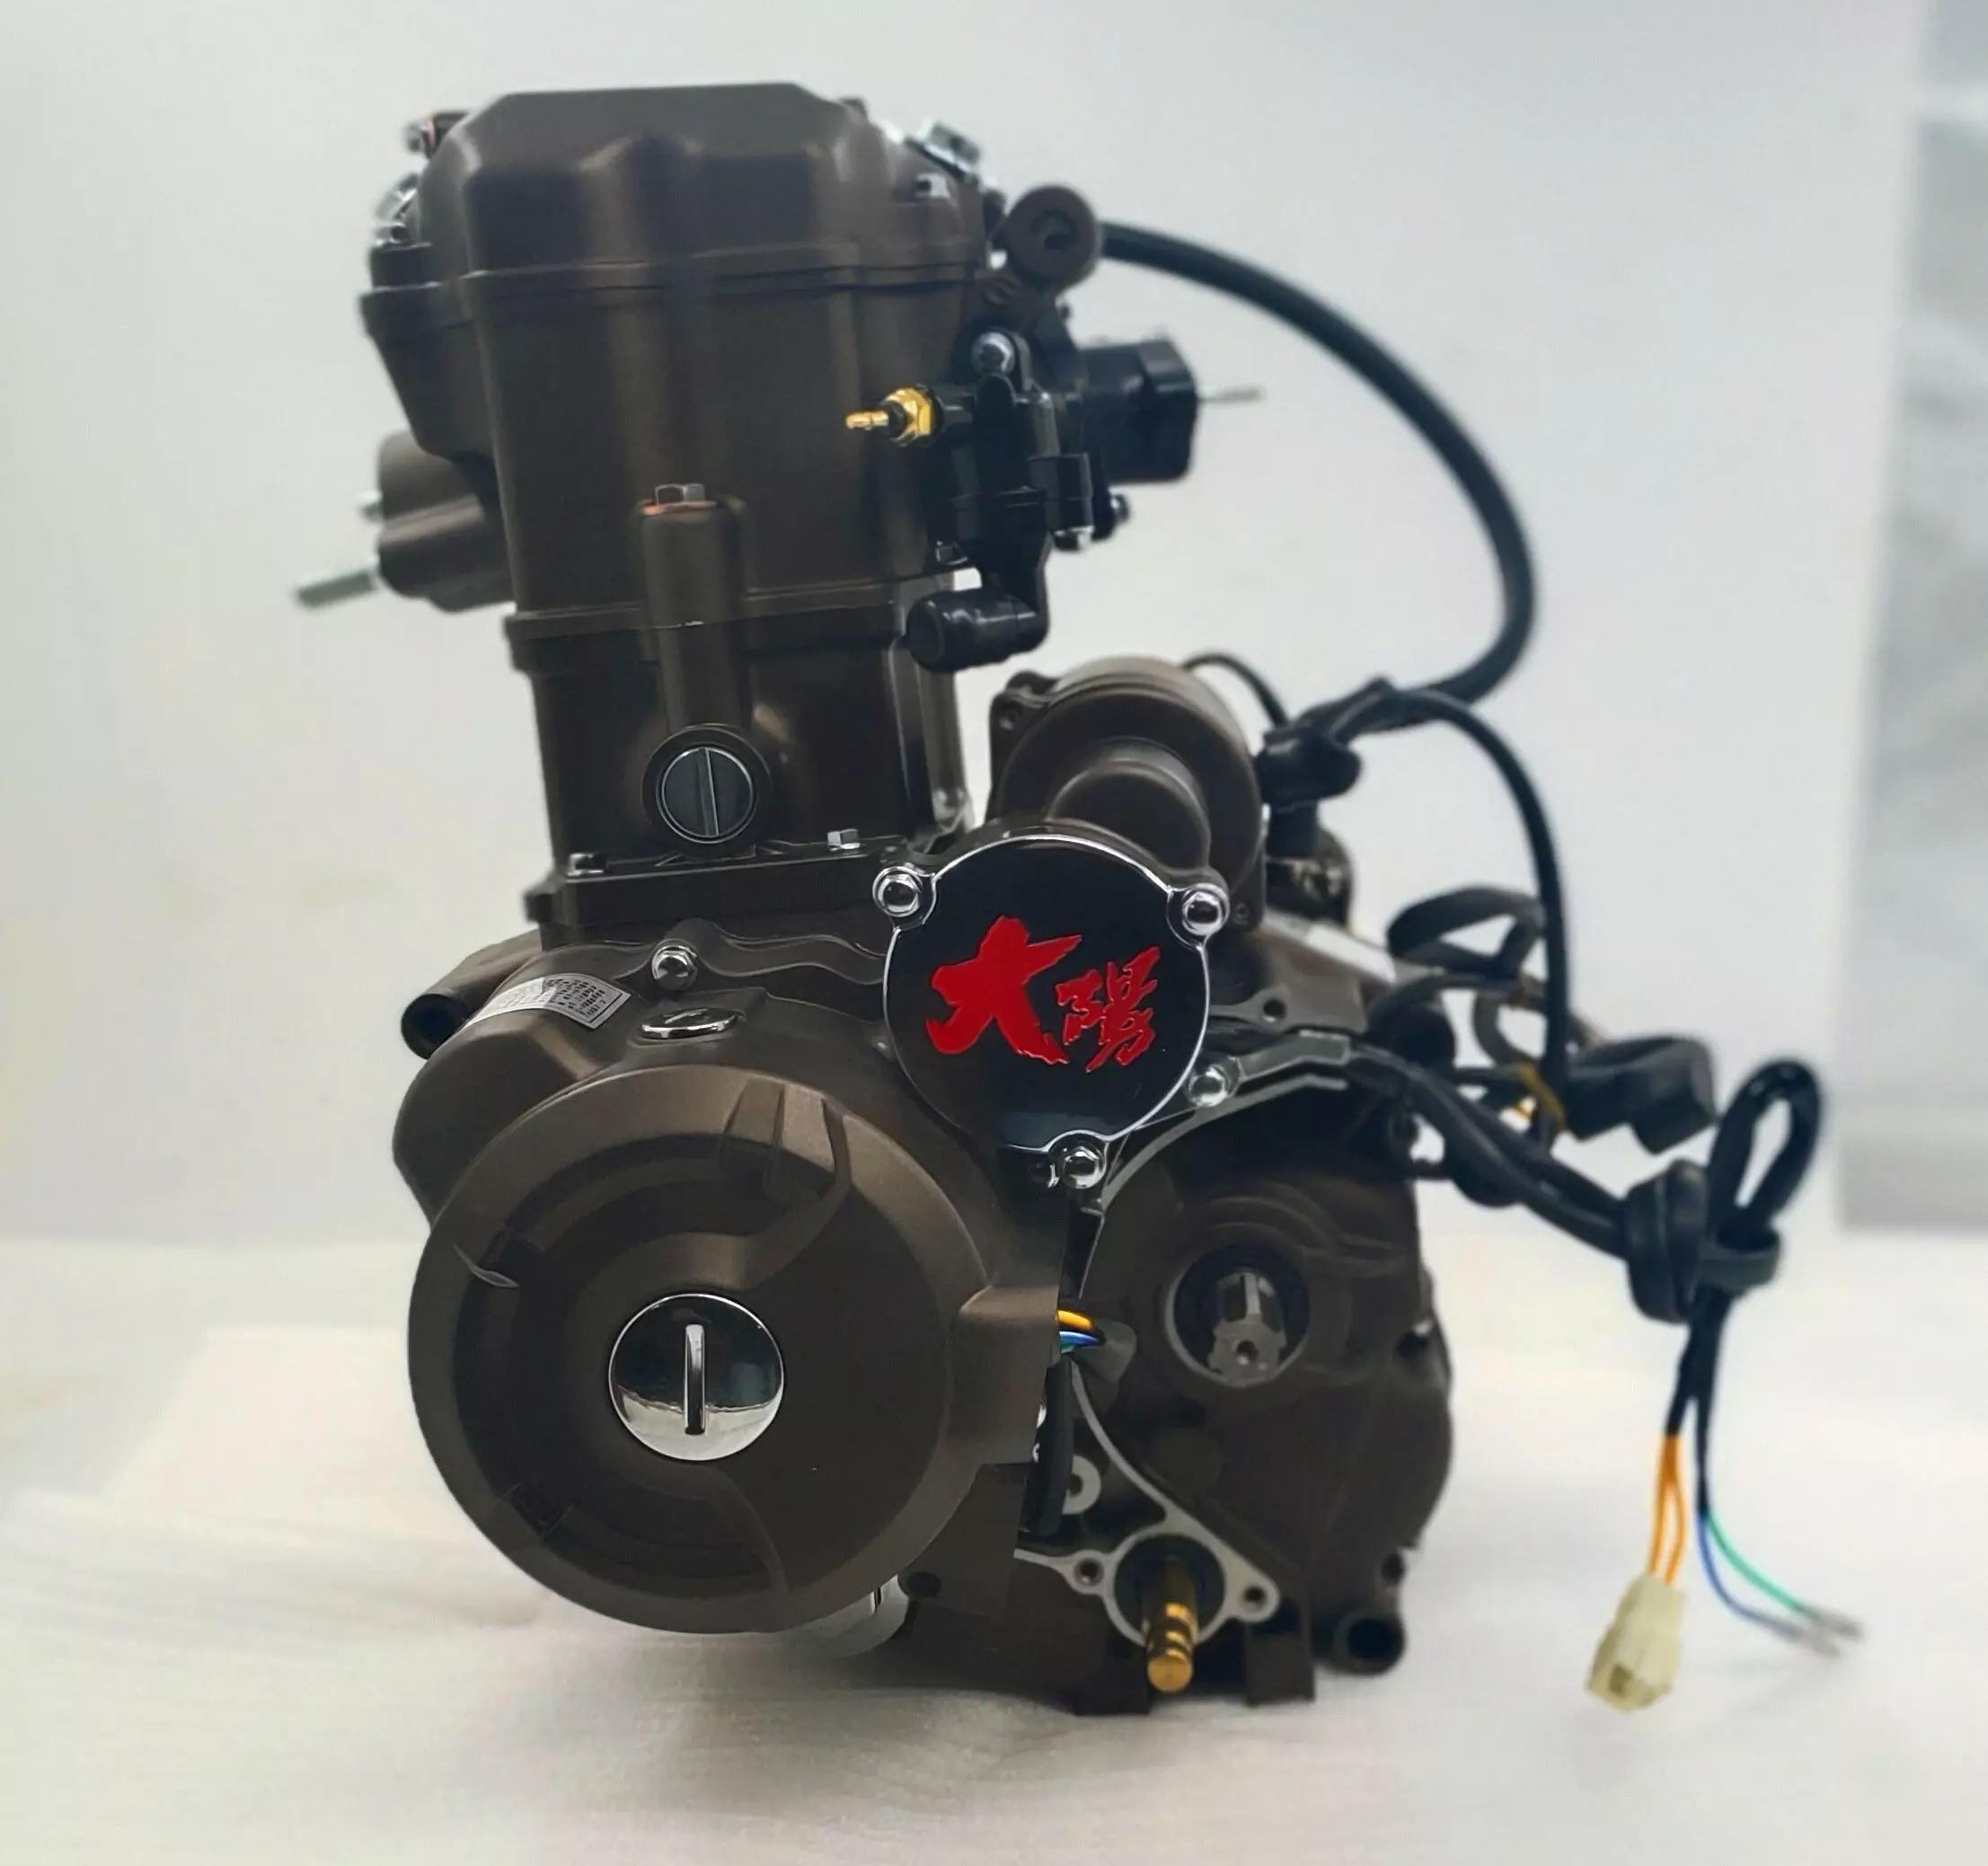 CG150 New Water-cooled DAYANG LIFAN Motorcycle Engine Assembly Single Cylinder Four Stroke Style China Sea 4 Stroke 1 Cylinder